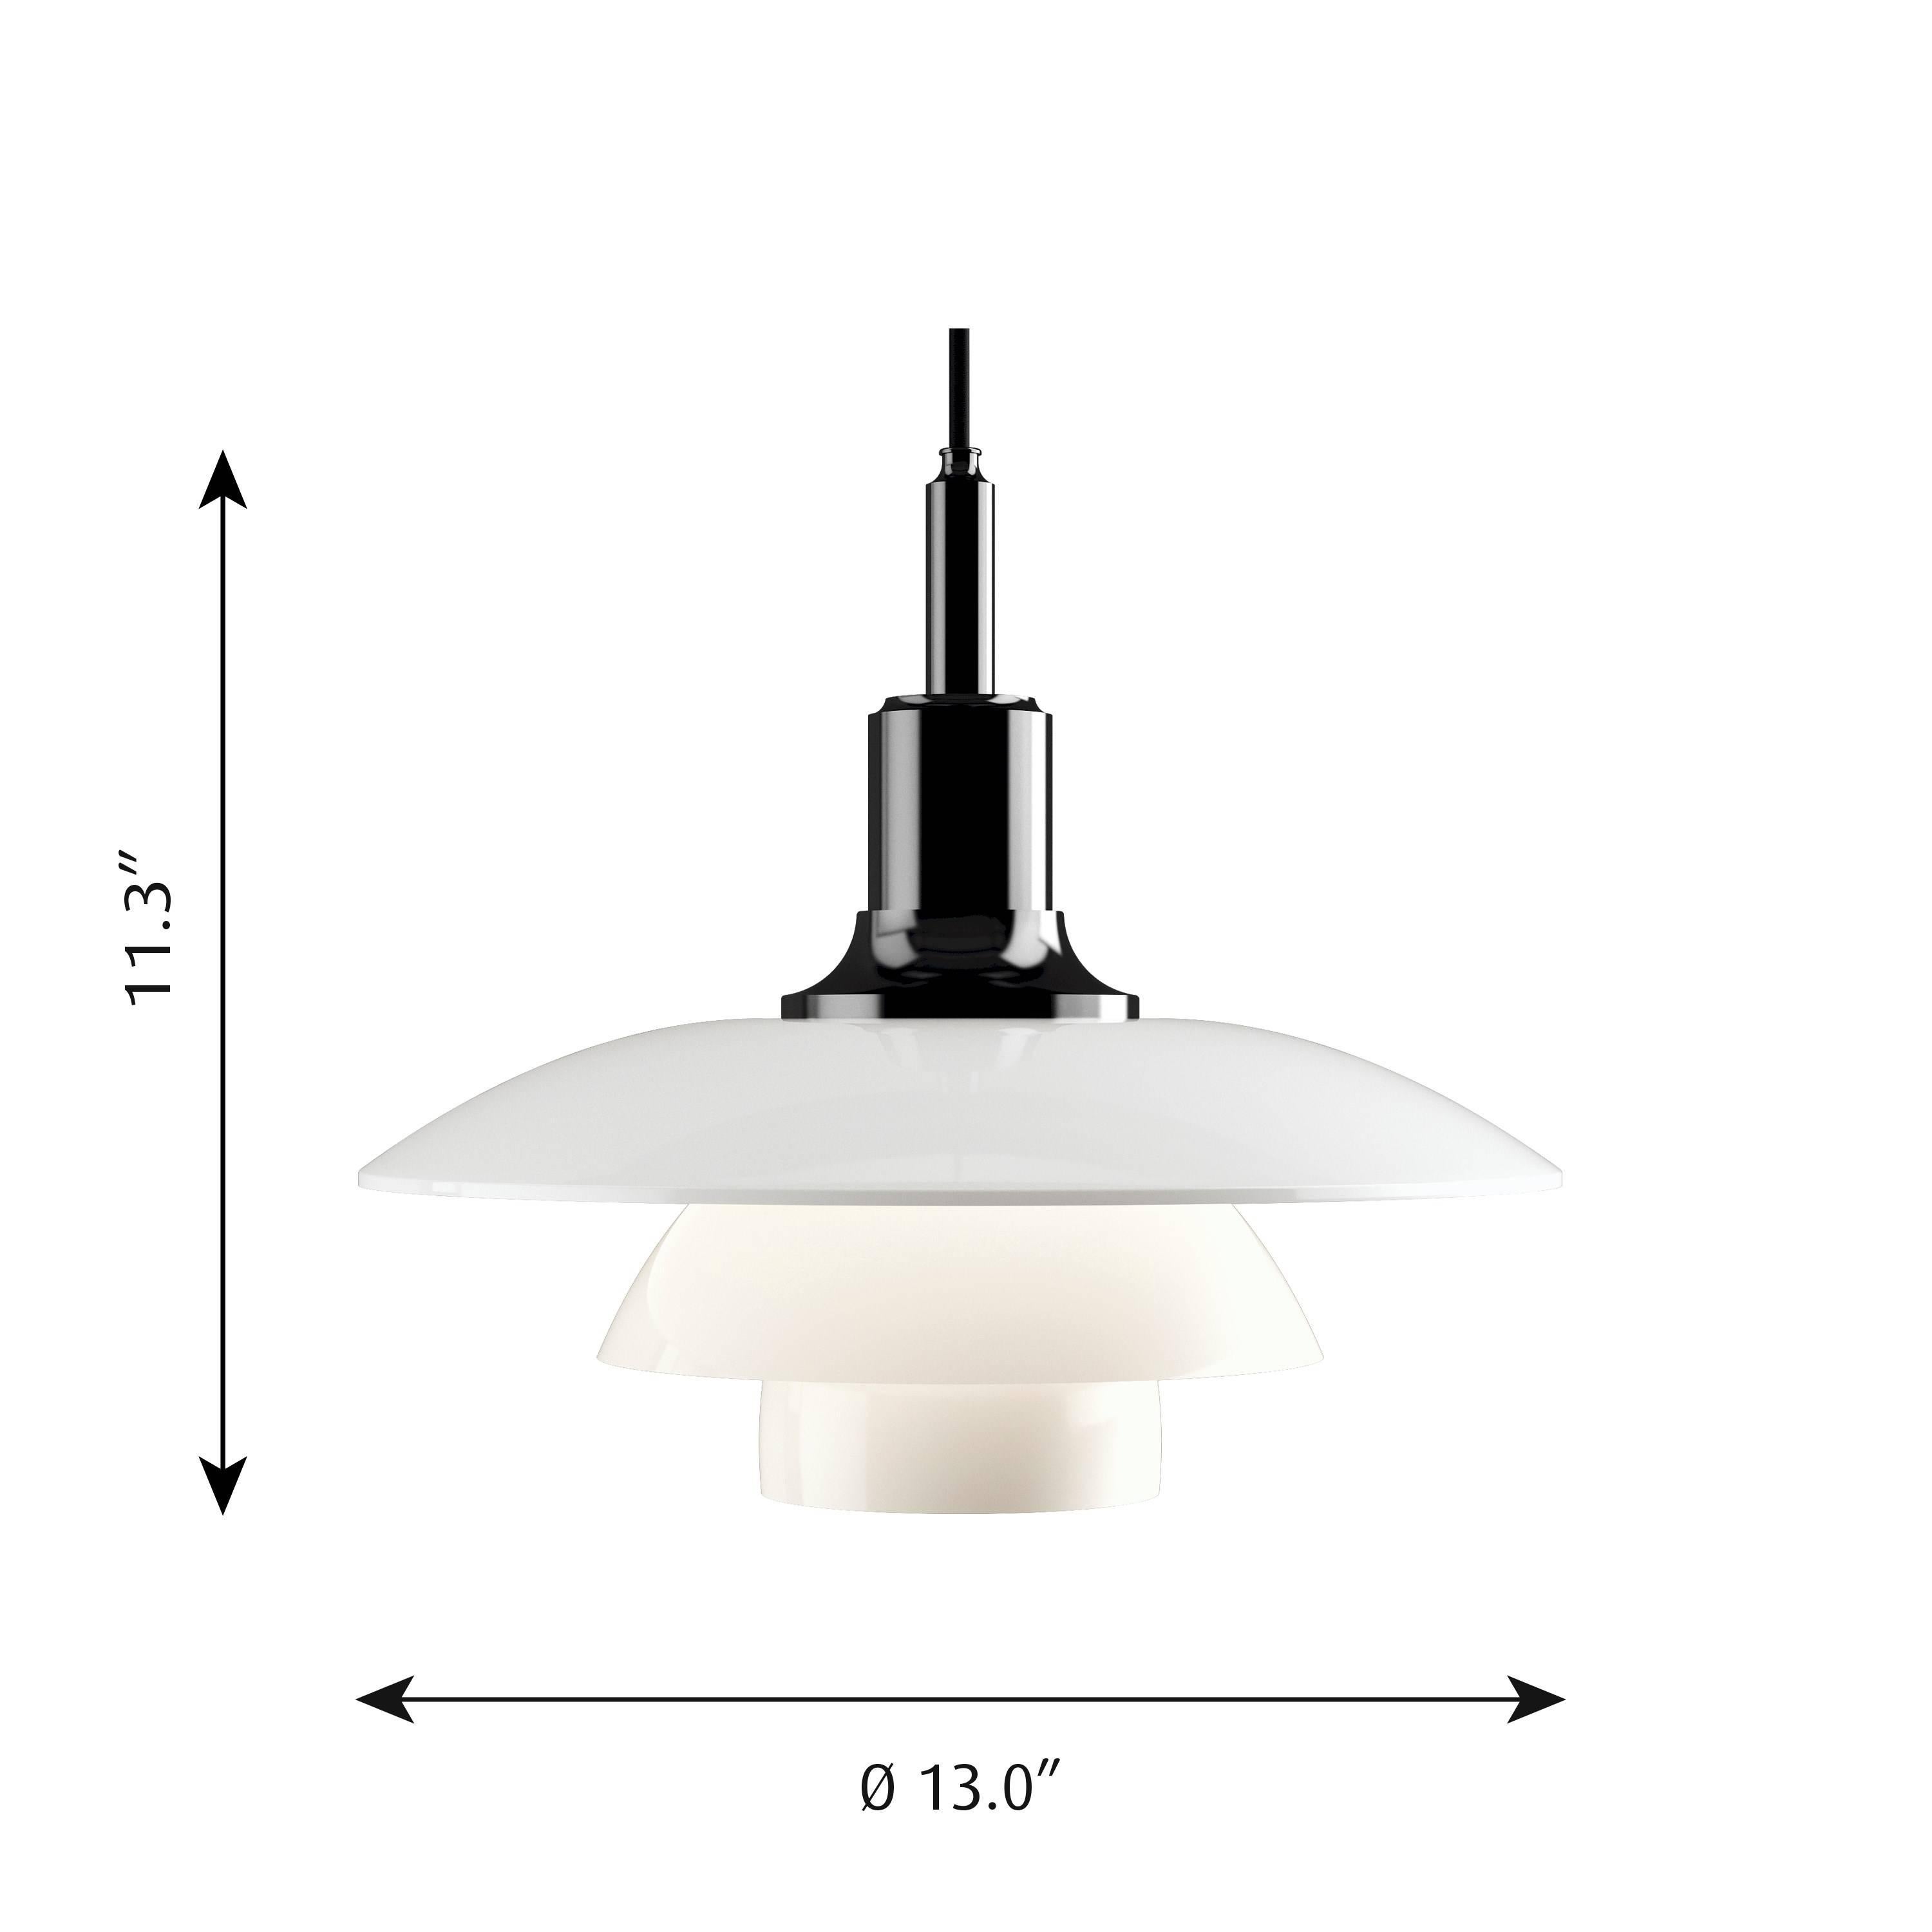 Poul Henningsen Glass PH 3½-3 Pendant for Louis Poulsen in Black Metallized

Executed in white opal glass and choice of brass, chrome or black metallized frame. The mouth-blown white opal glass shades soften the overall look of the lamp and